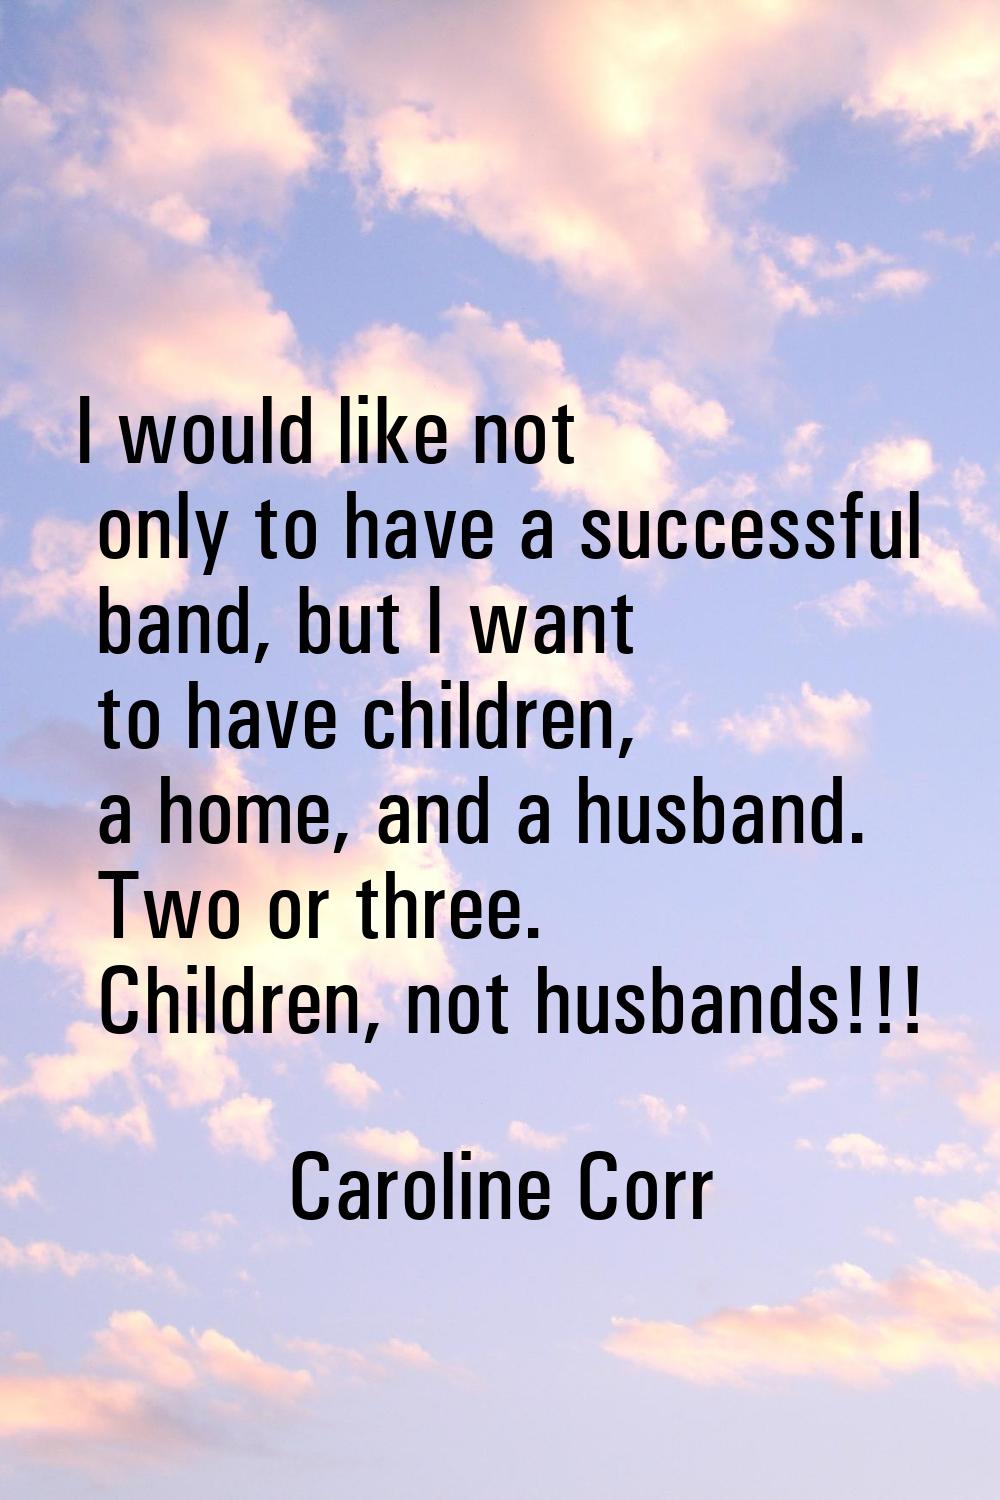 I would like not only to have a successful band, but I want to have children, a home, and a husband